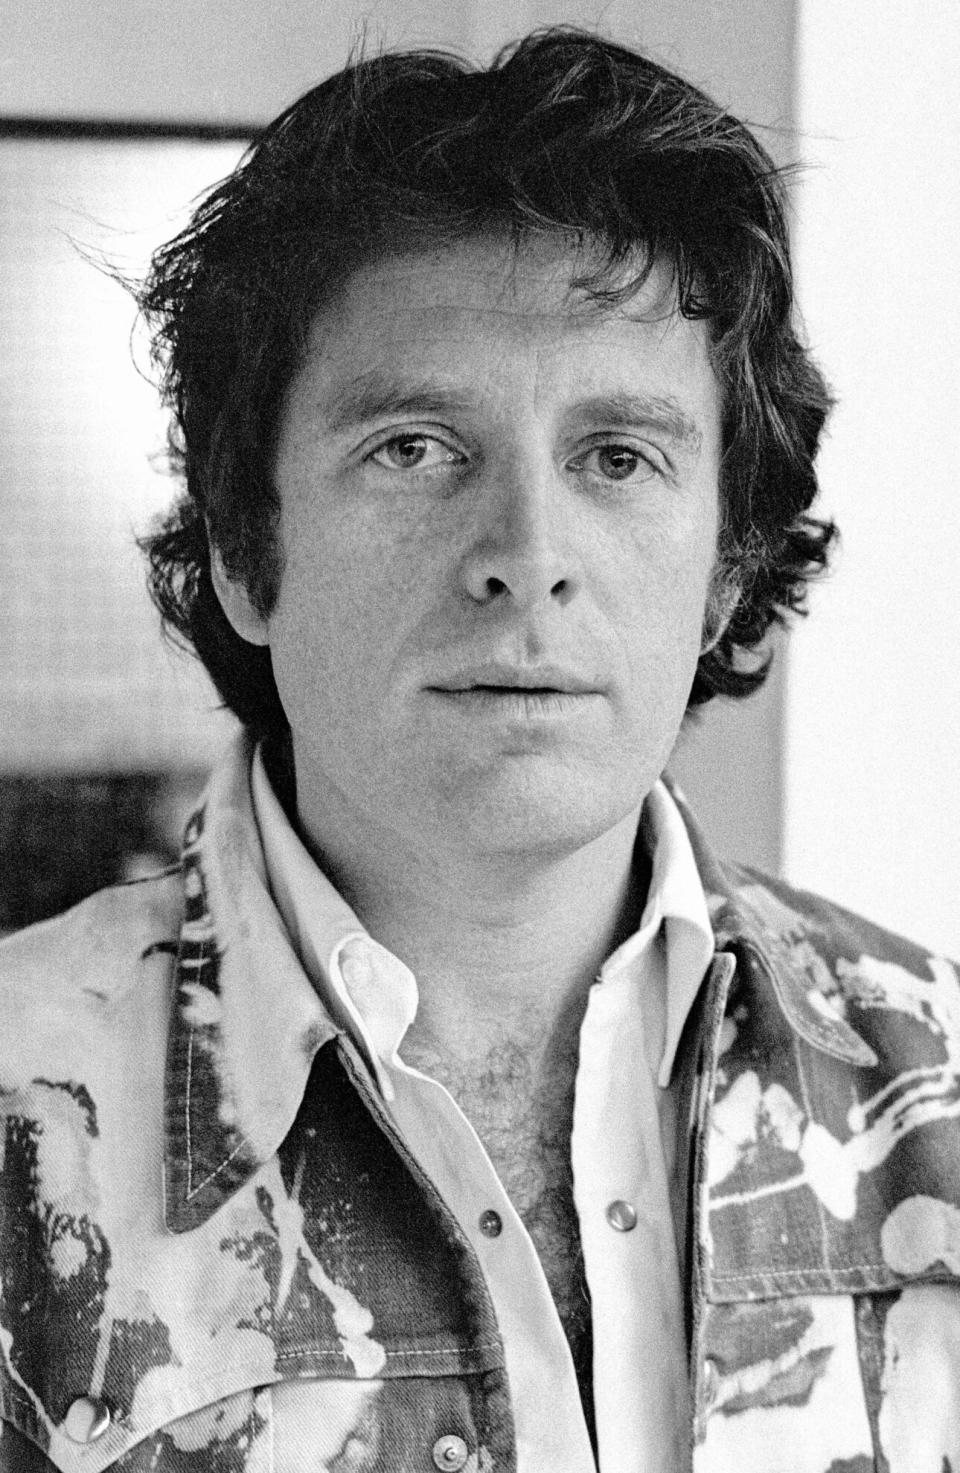 Chris Blackwell in 1972. (Credit: Brian Cooke/Redferns)